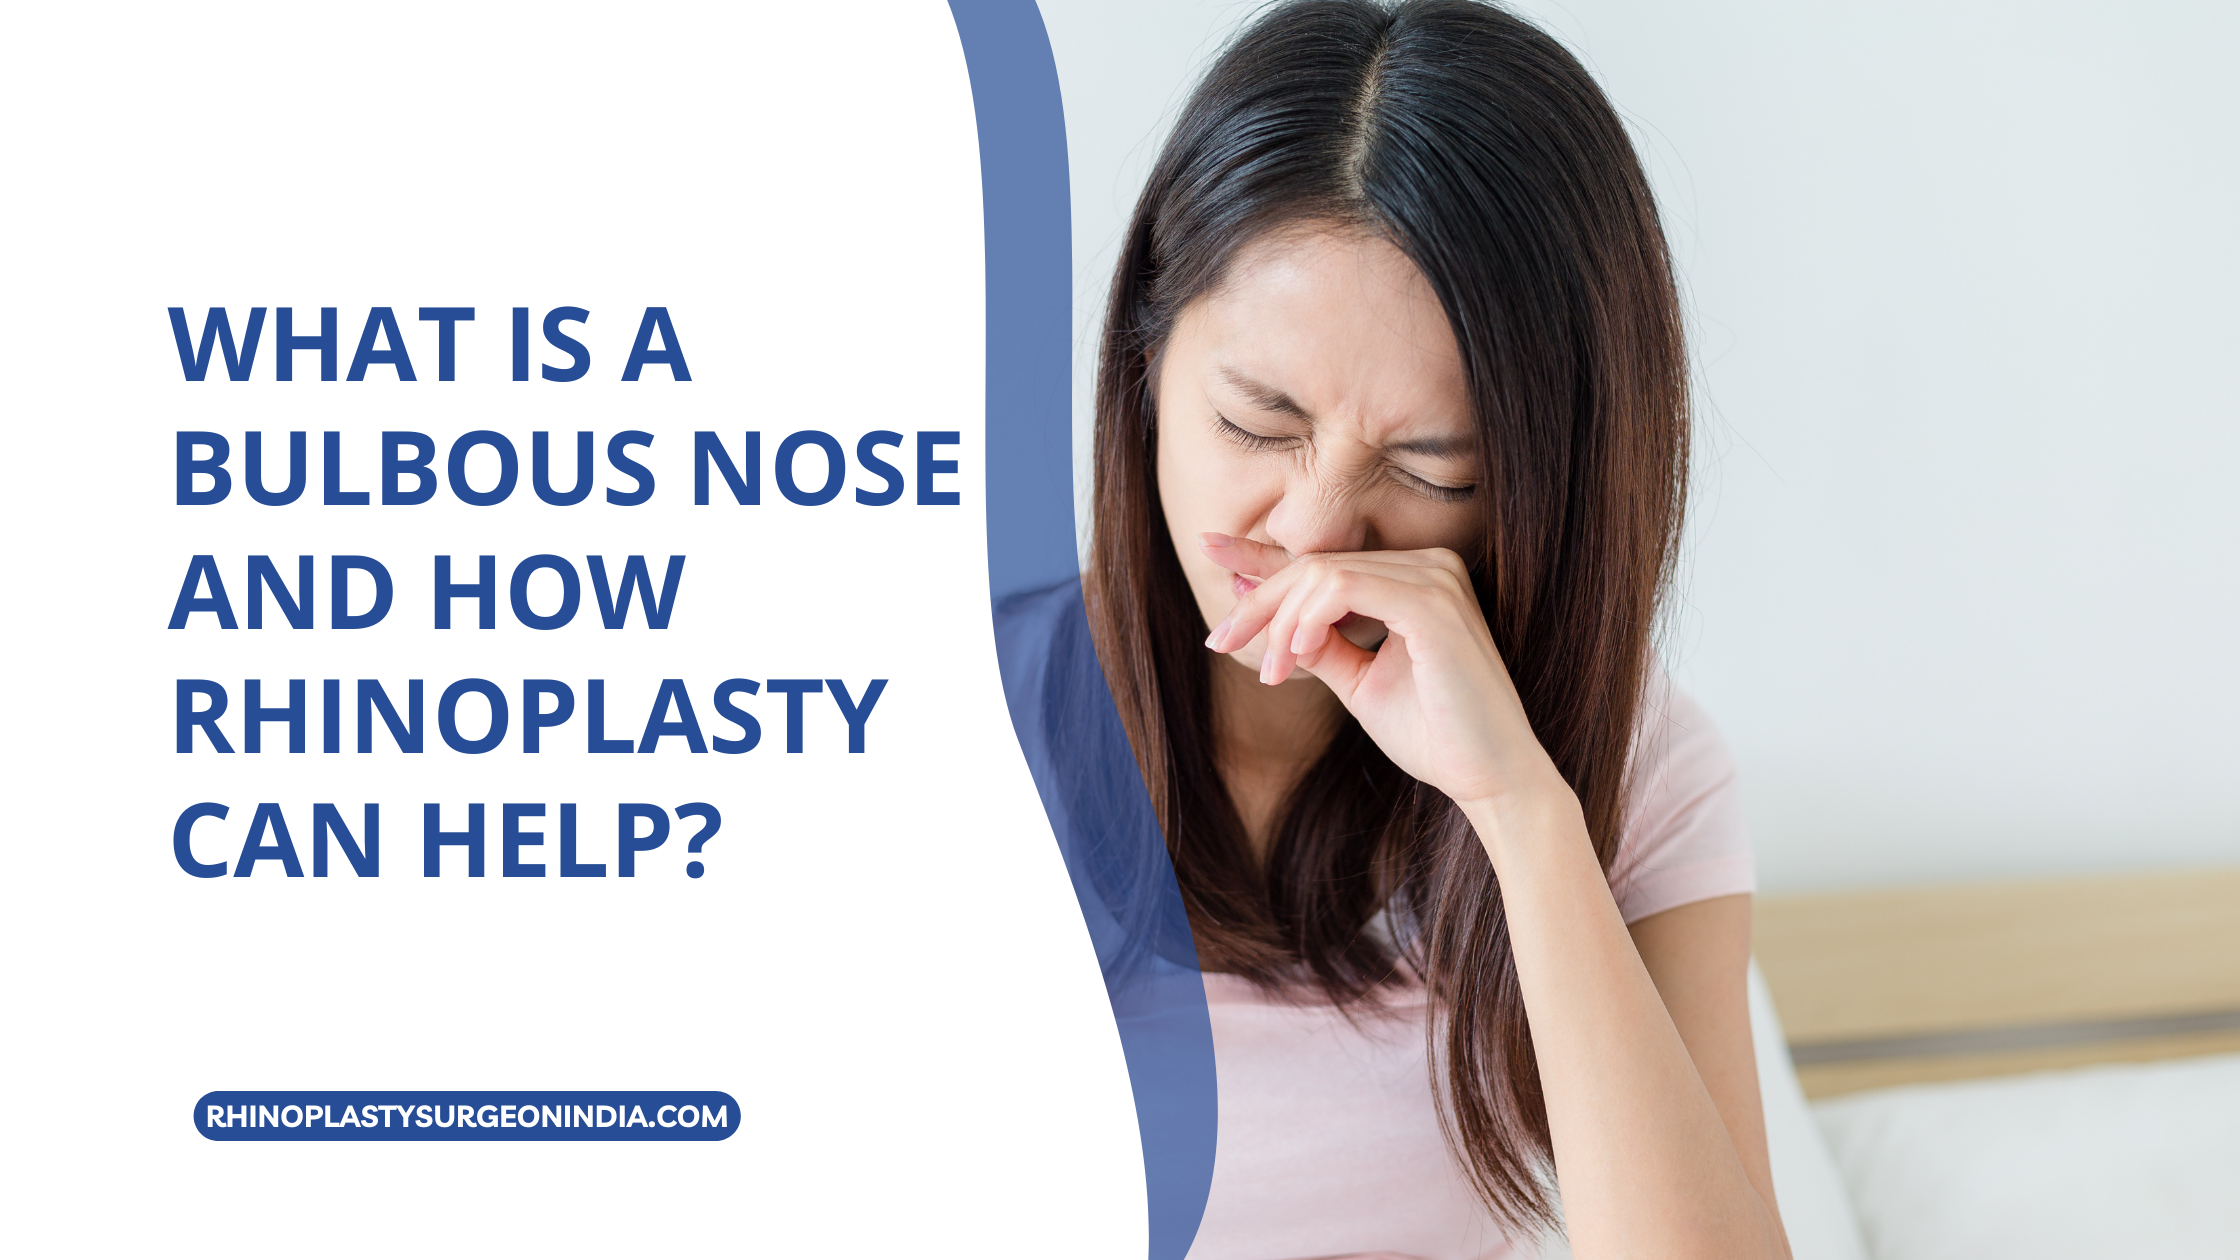 What is a Bulbous Nose and How Rhinoplasty Can Help?